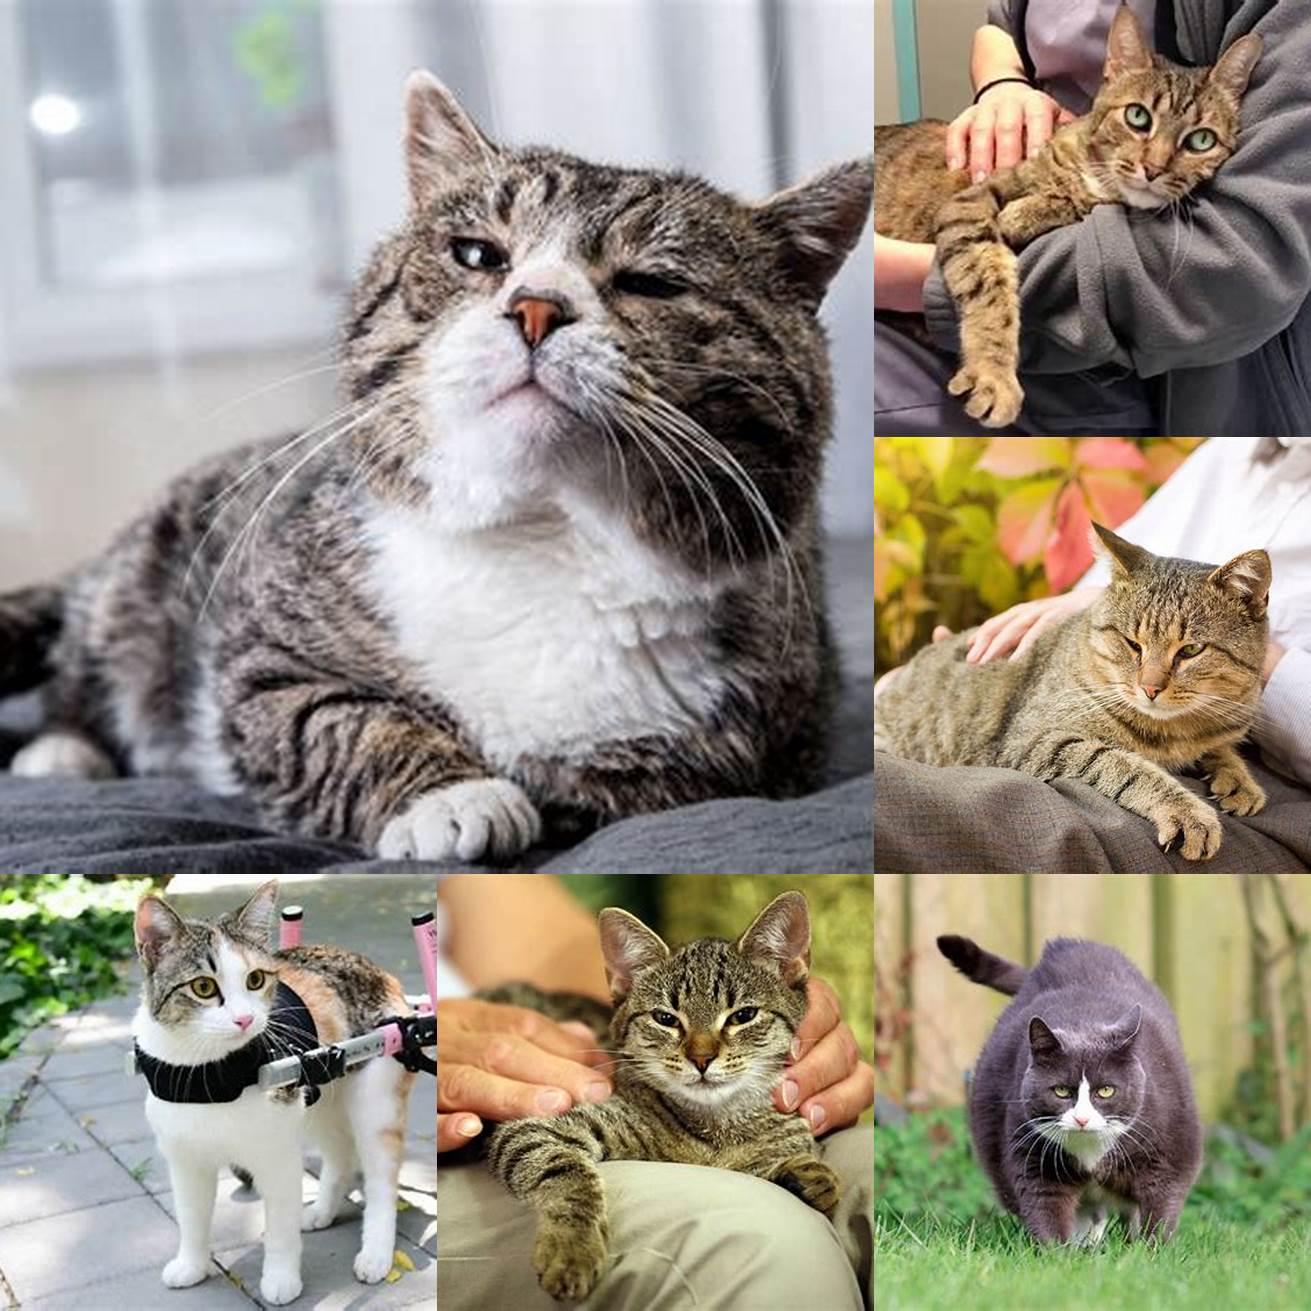 4 Senior cats or cats with mobility issues